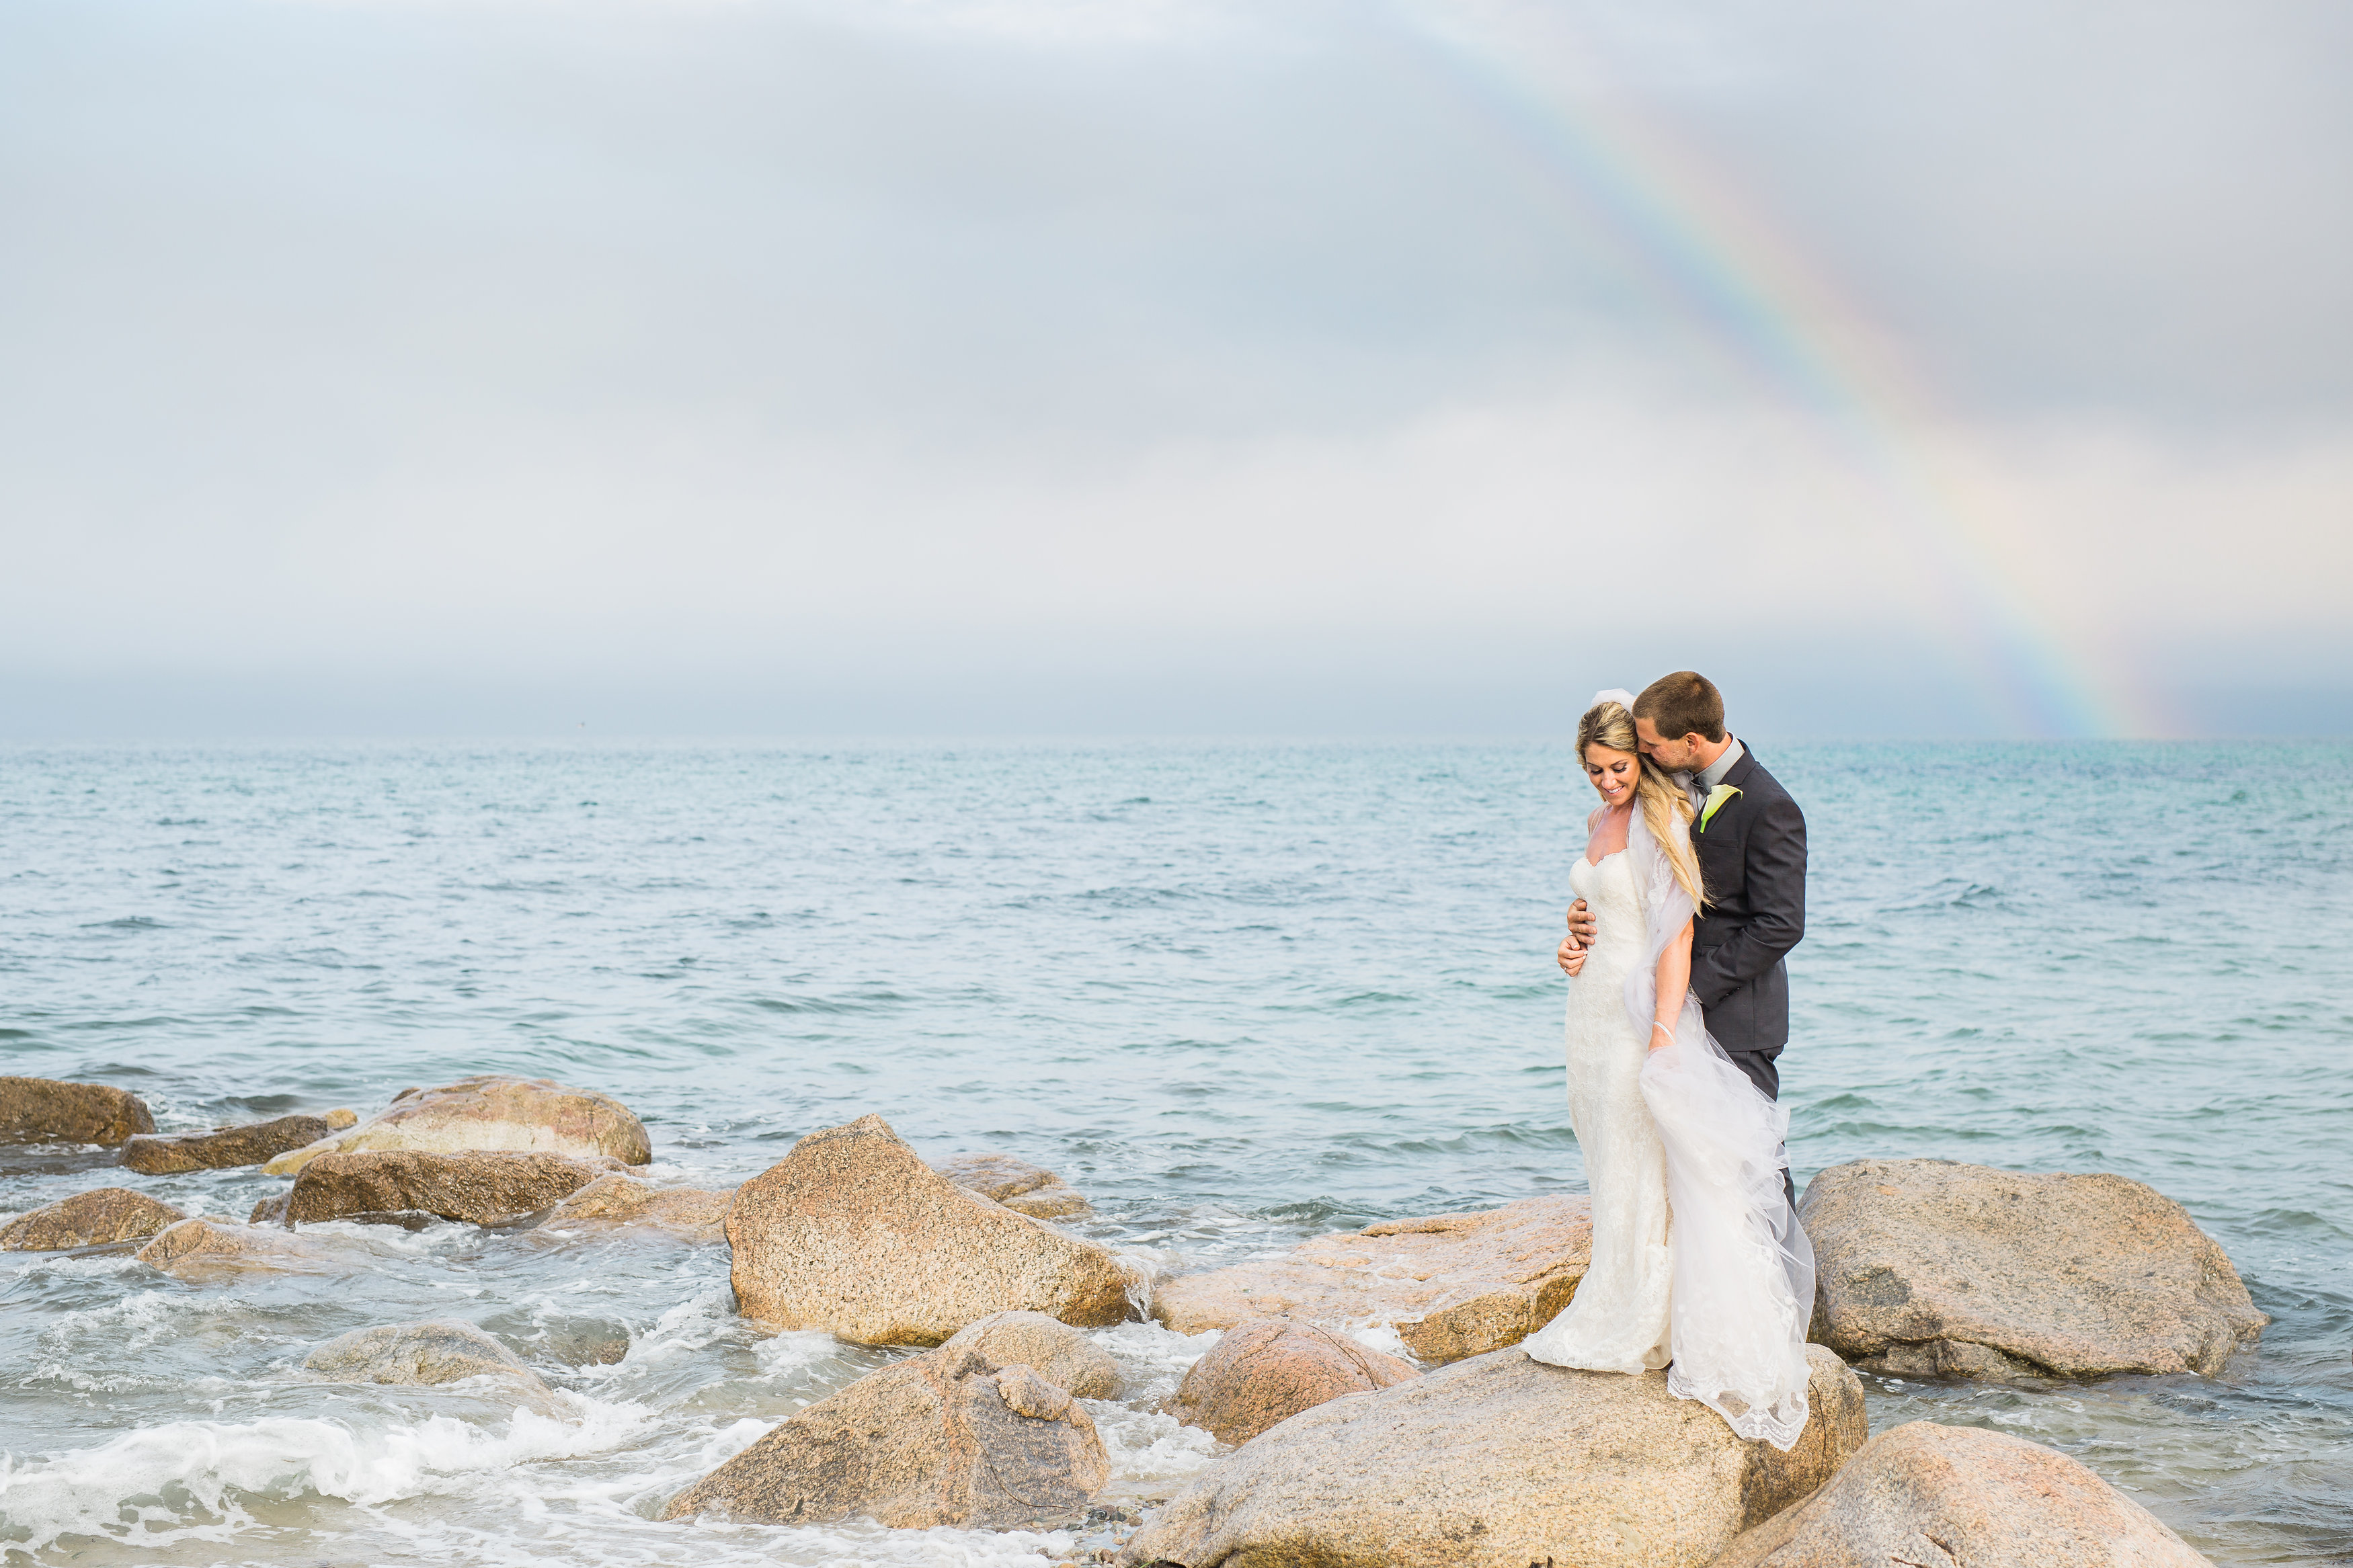 Bad Weather on Your Wedding Day? Bring It! - Sarah Jayne Photography